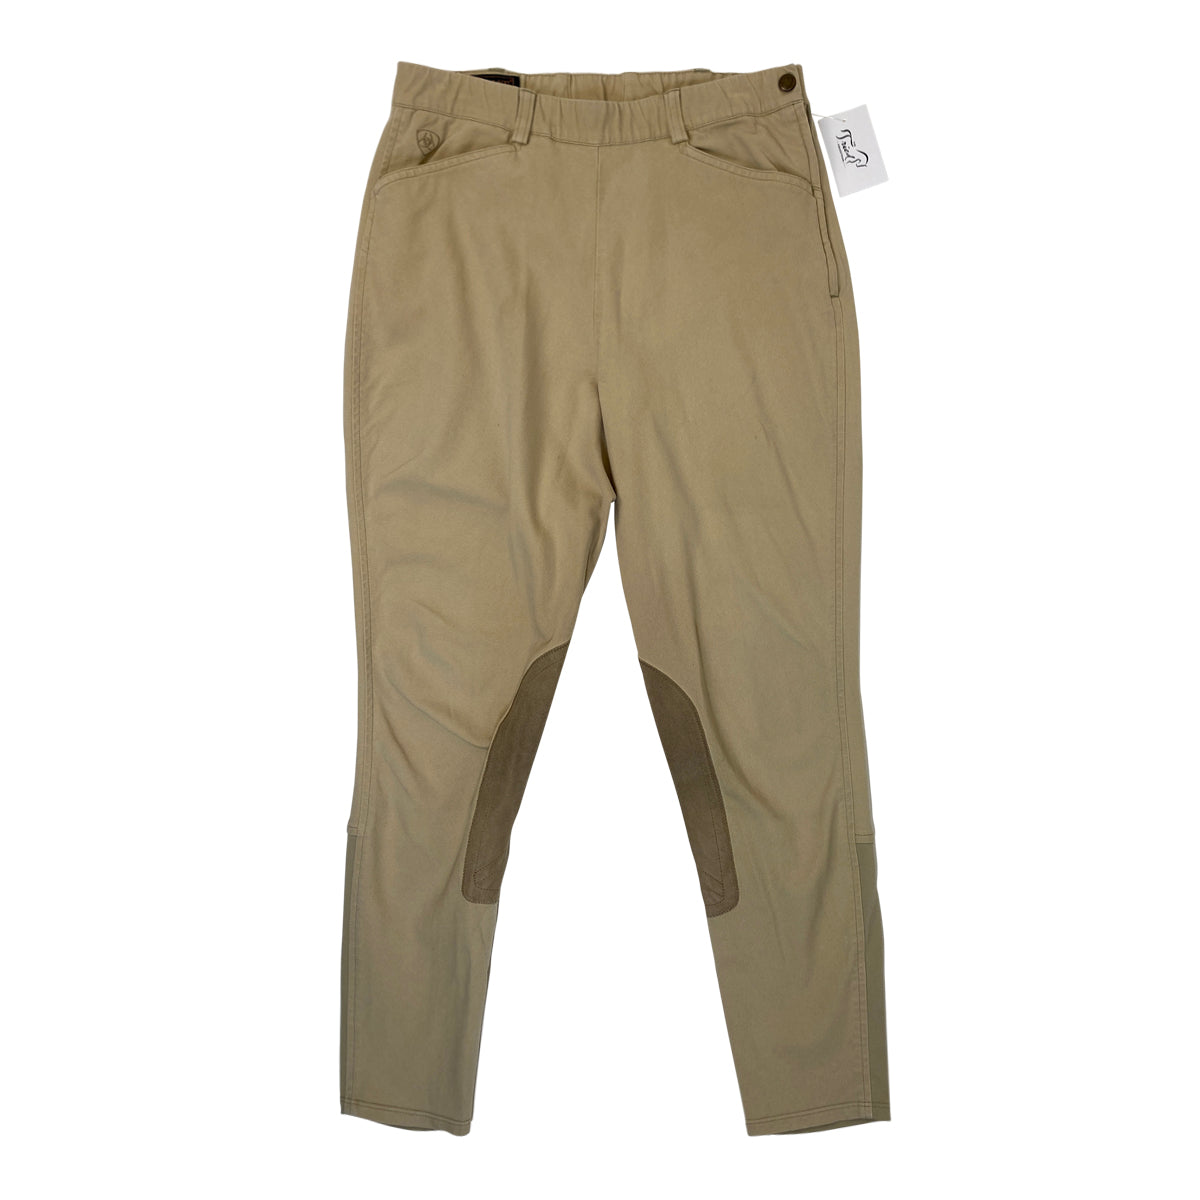 Ariat 'All Circuit' Side Zip Breeches in Tan